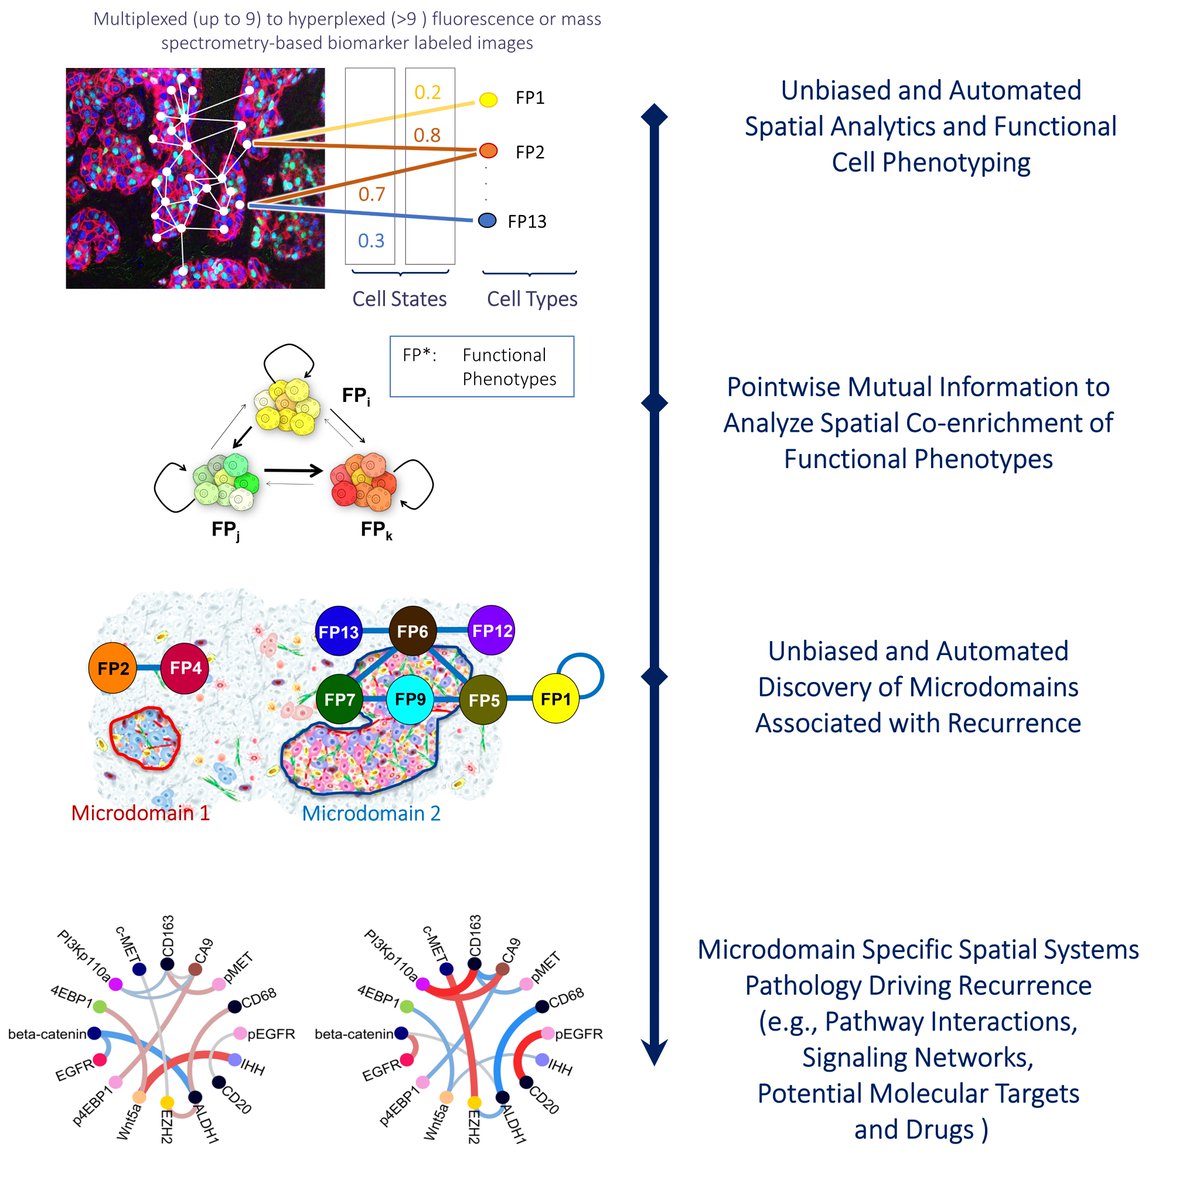 We are pleased to announce the publication of a proprietary, unbiased, automated and spatial analytics driven functional cell phenotyping approach in the latest issue of @CellRepMethods @CellPressNews. 

linkedin.com/posts/spintell…

#PrecisionMedicine #SpatialProteomics #CompPath